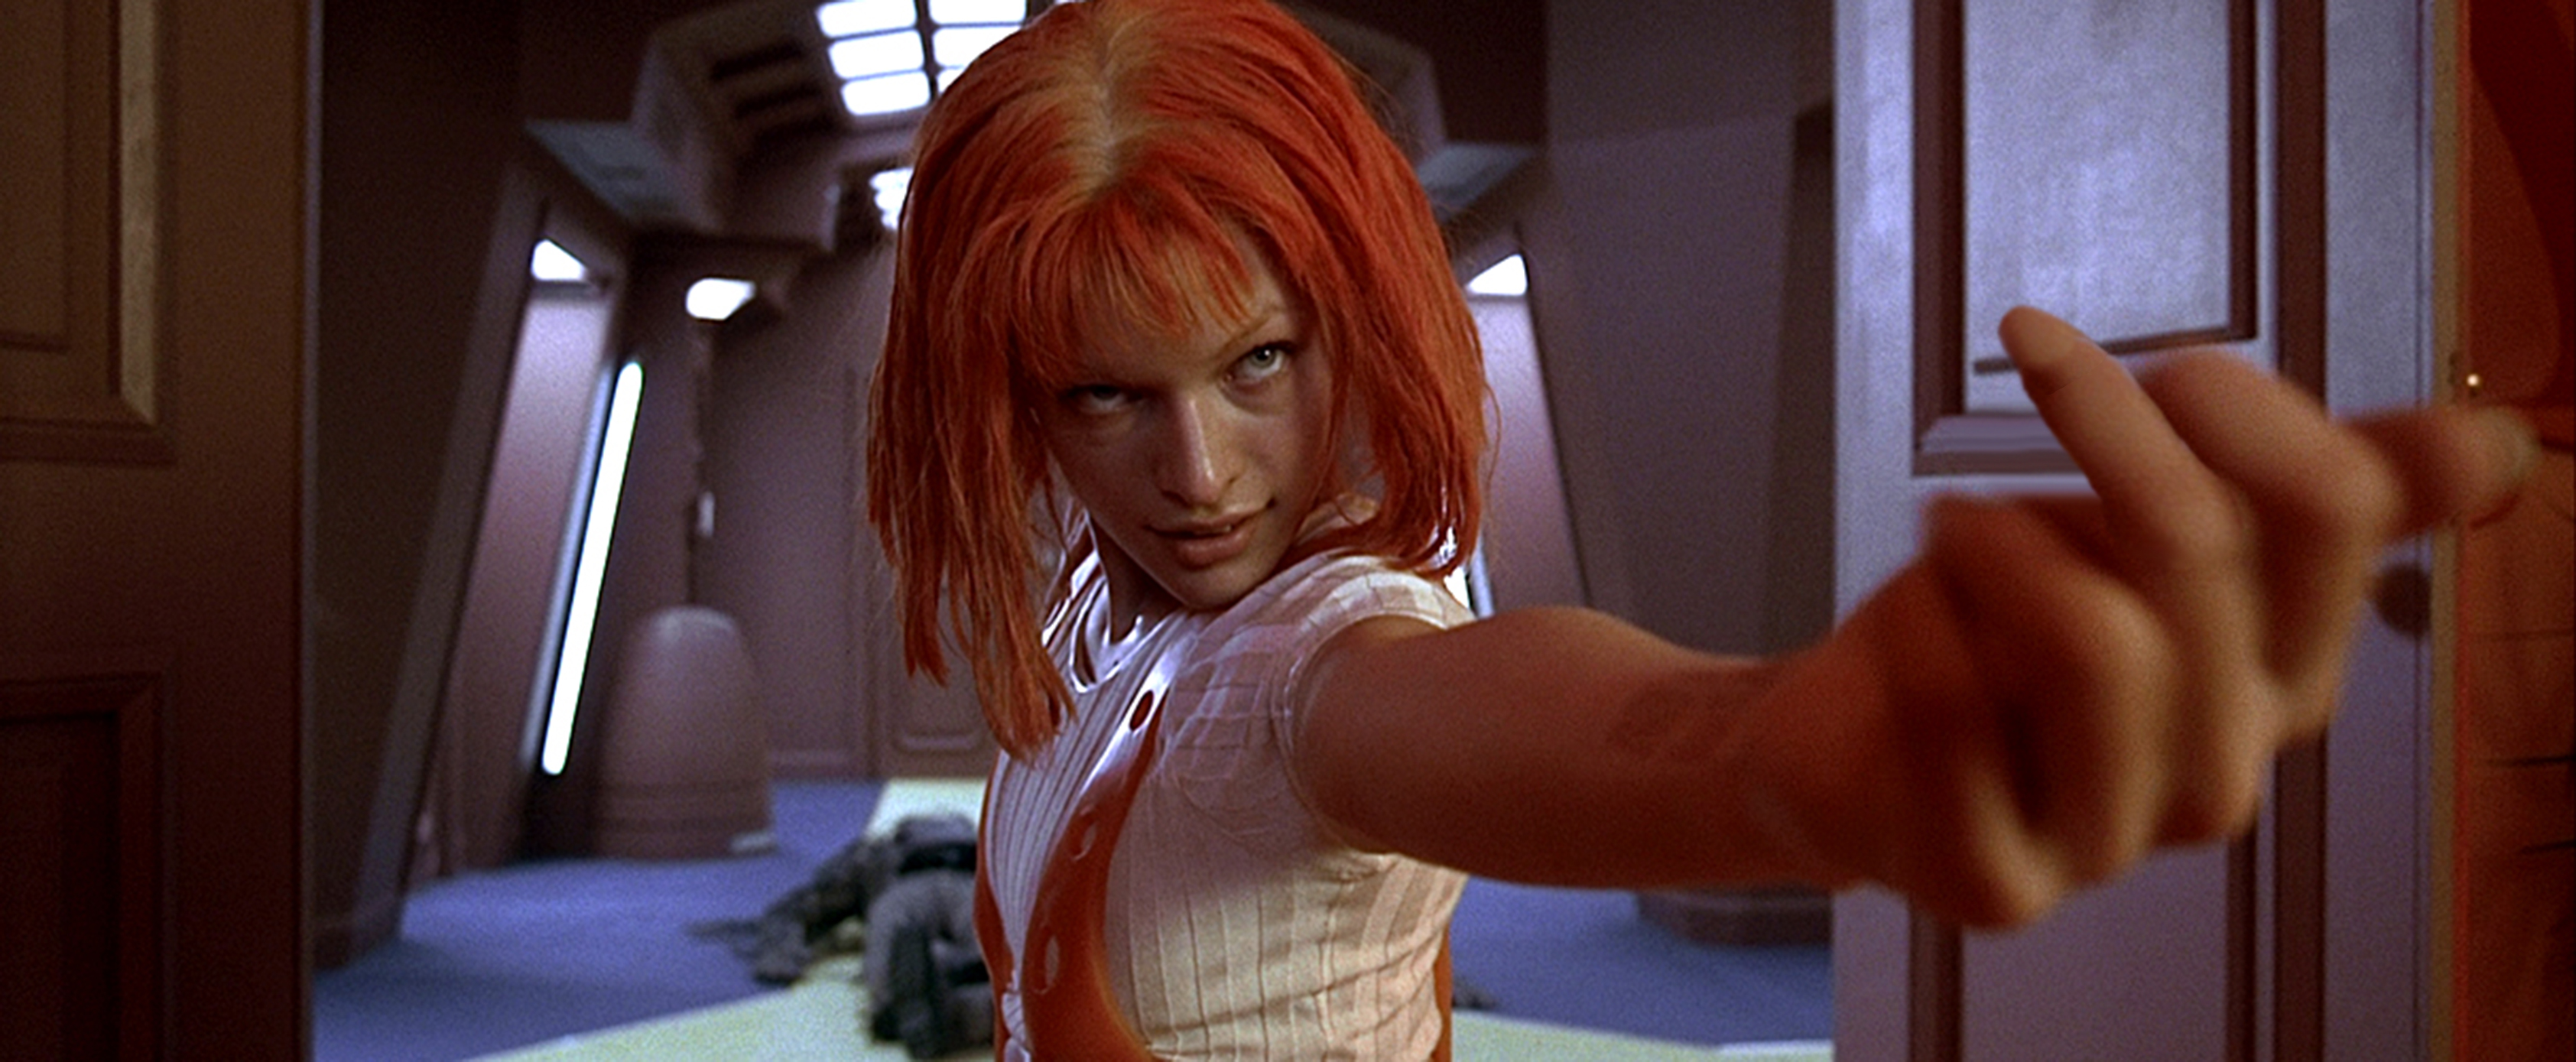 Fifth Element is a movie made 18 years ago.